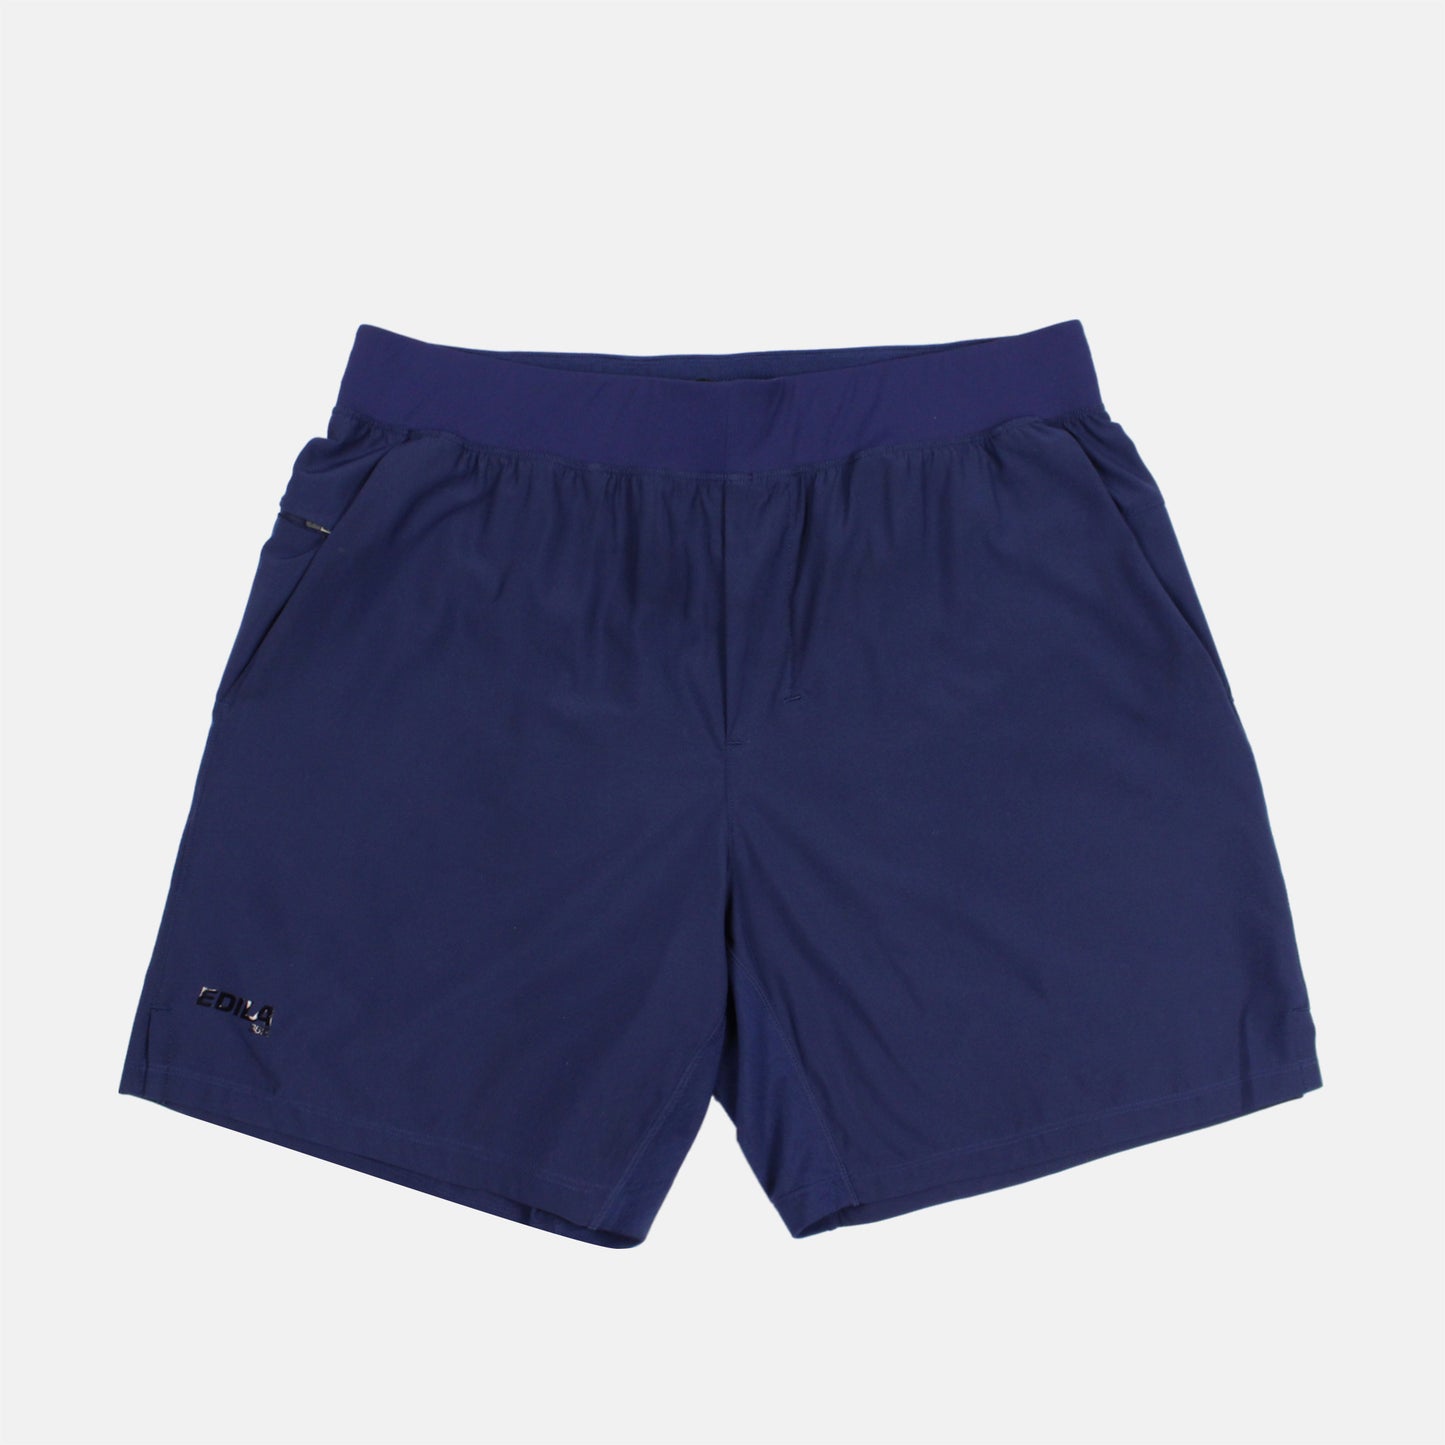 THE ACTIVE SHORTS